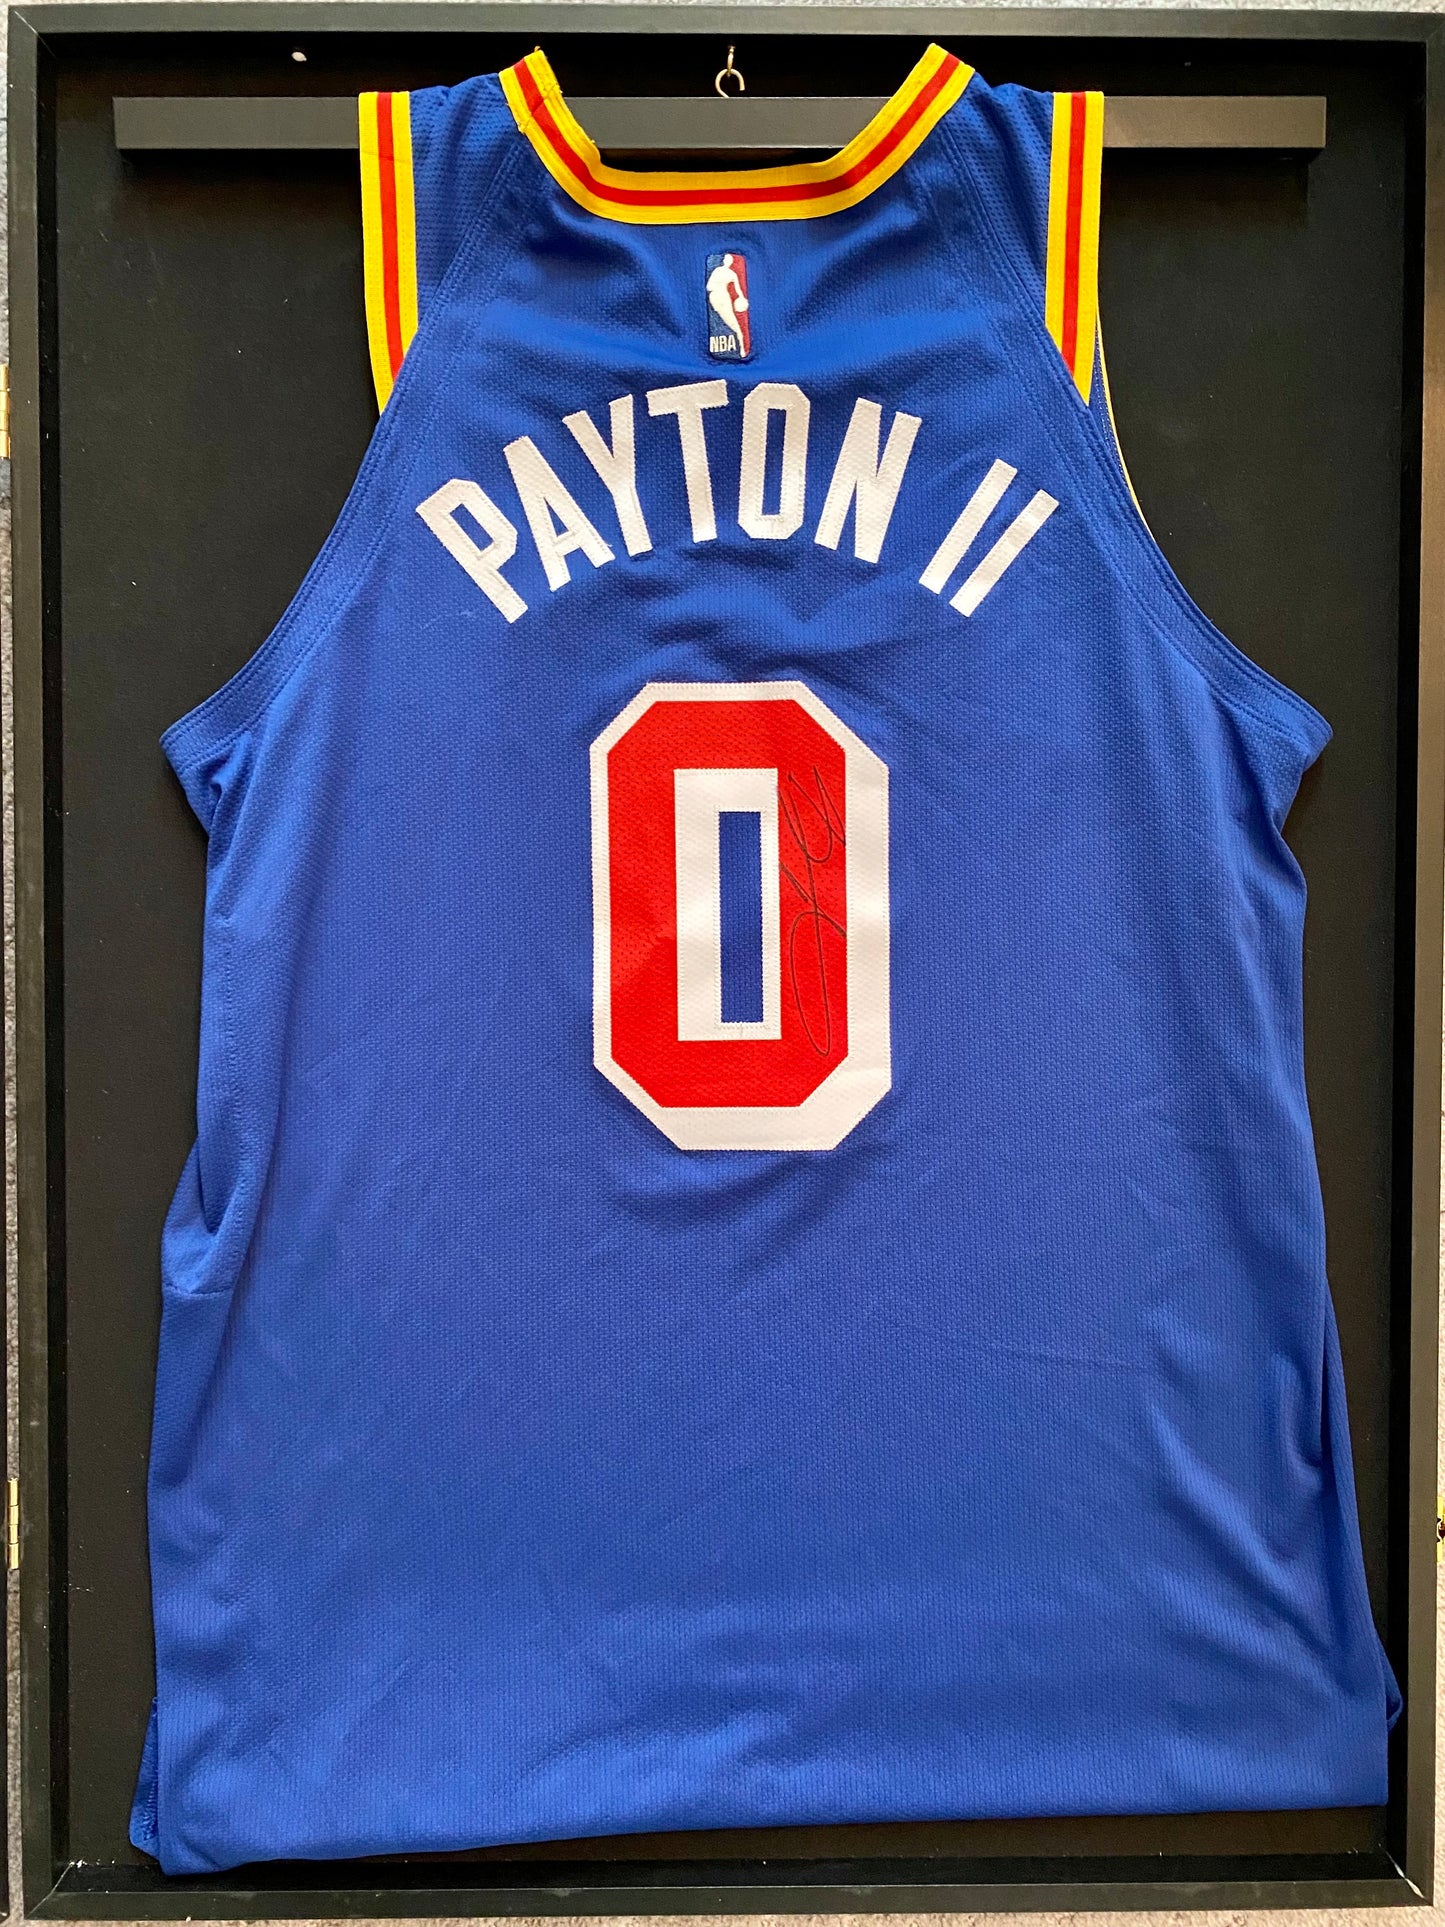 Buy Gary Payton Ii Signed Jersey Psa/dna Golden State Warriors Online in  India 